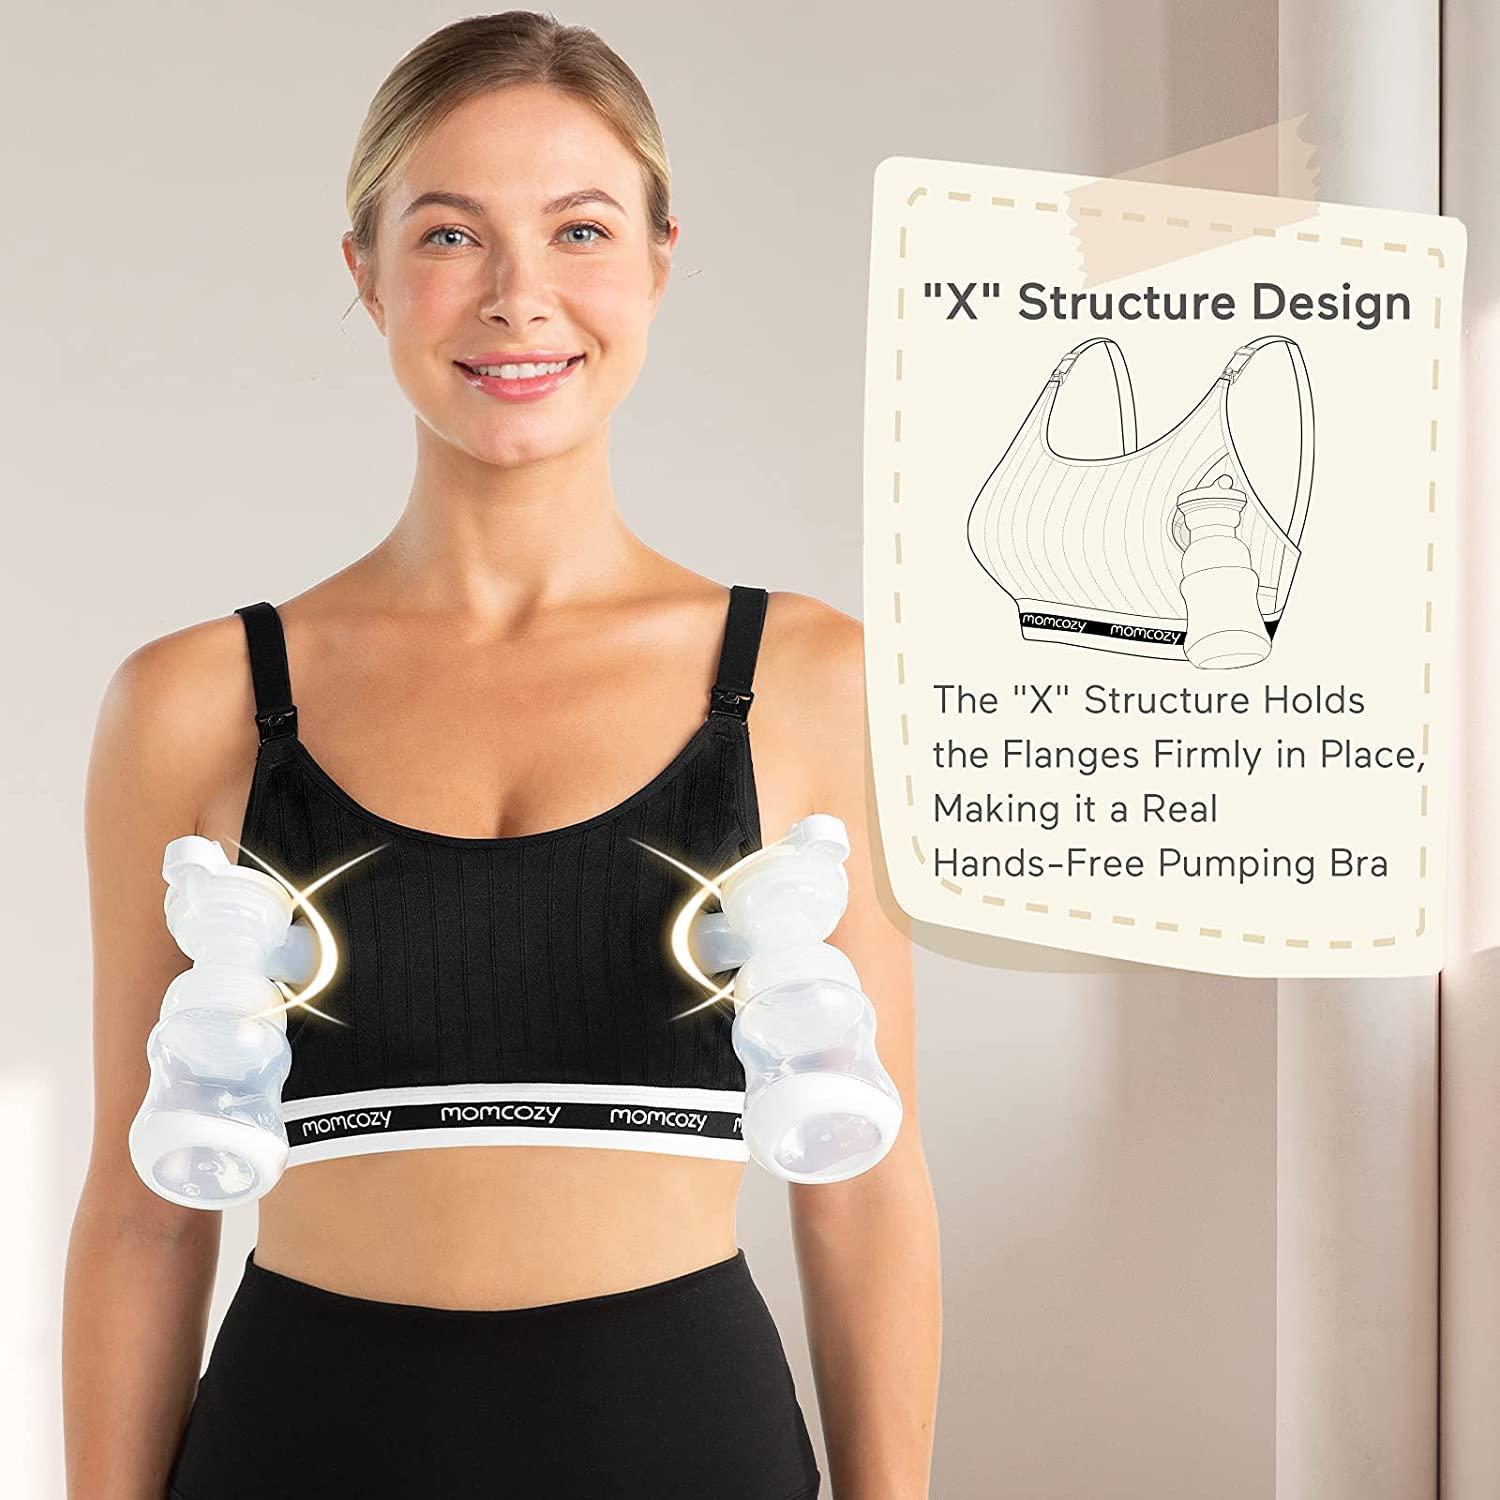 Momcozy Hands-Free Pumping Bra | Adjustable Breast Pump and Nursing Bra |  All Day Wear for Spectra, Lansinoh, Philips Avent | Black